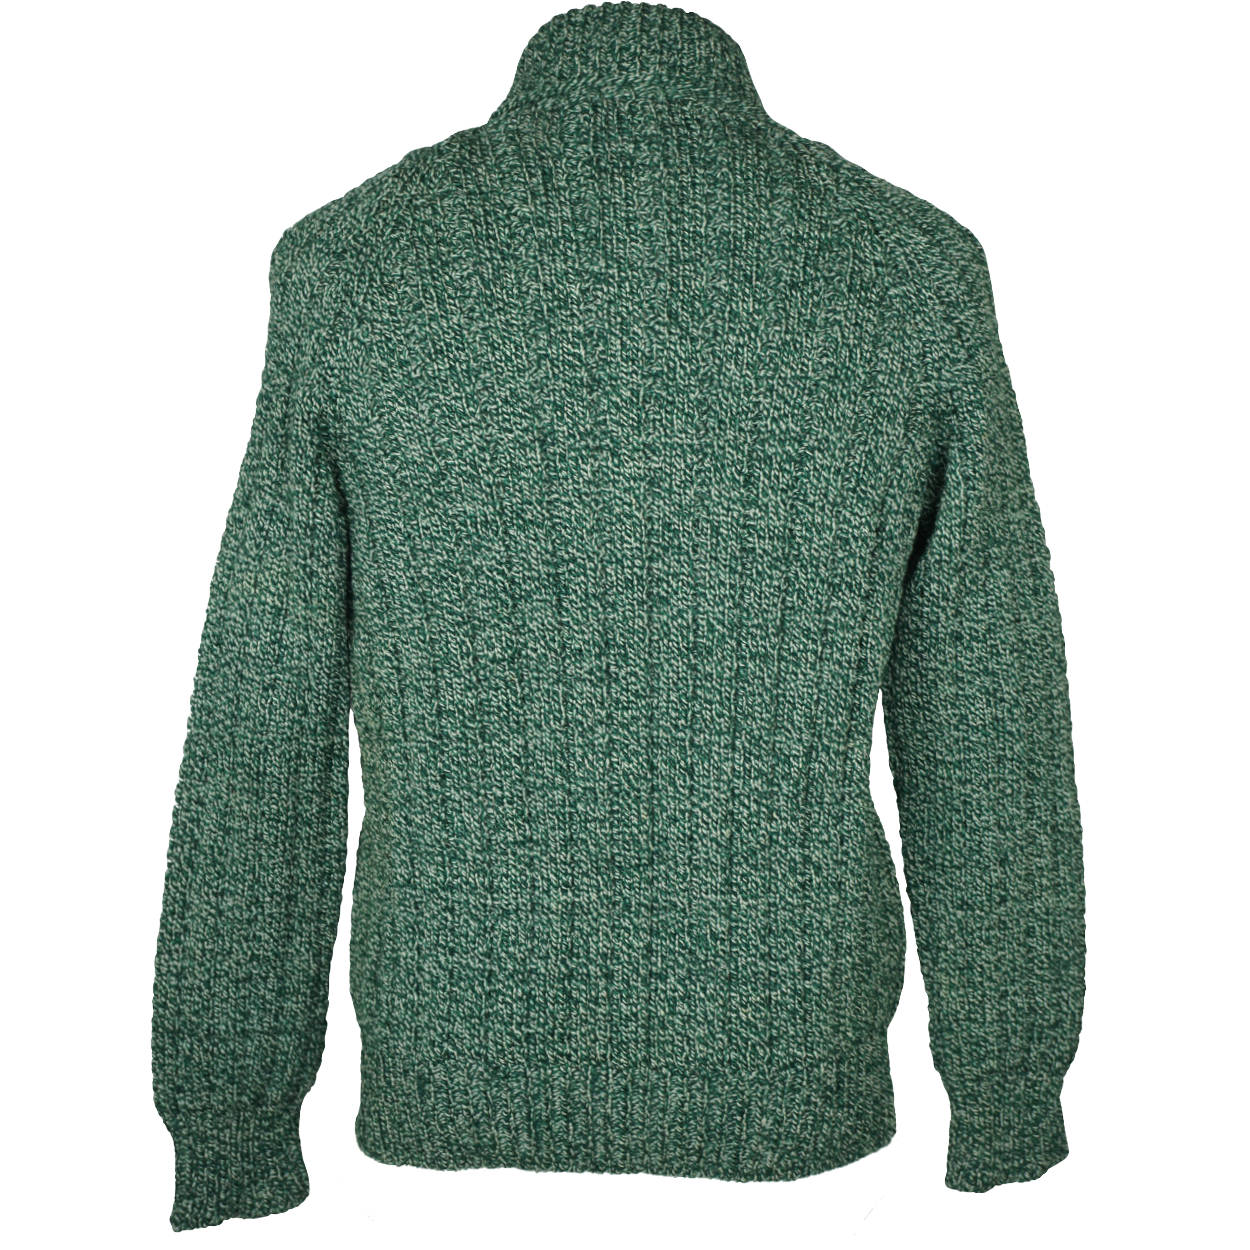 Vintage 1970s Mens Sweater Handcrafted by Canadian Eskimos Inuit Green ...